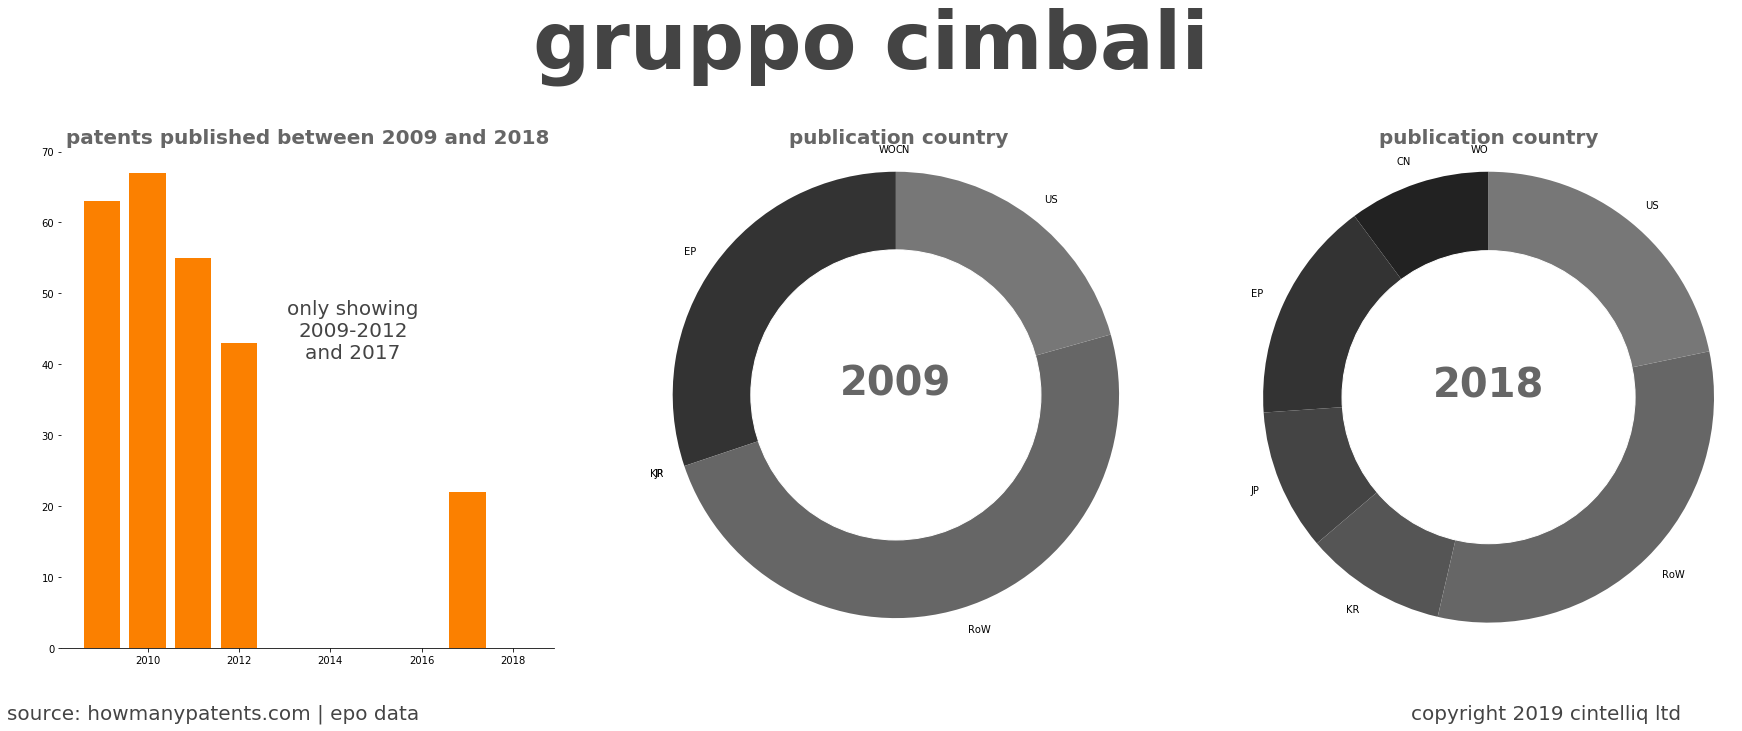 summary of patents for Gruppo Cimbali